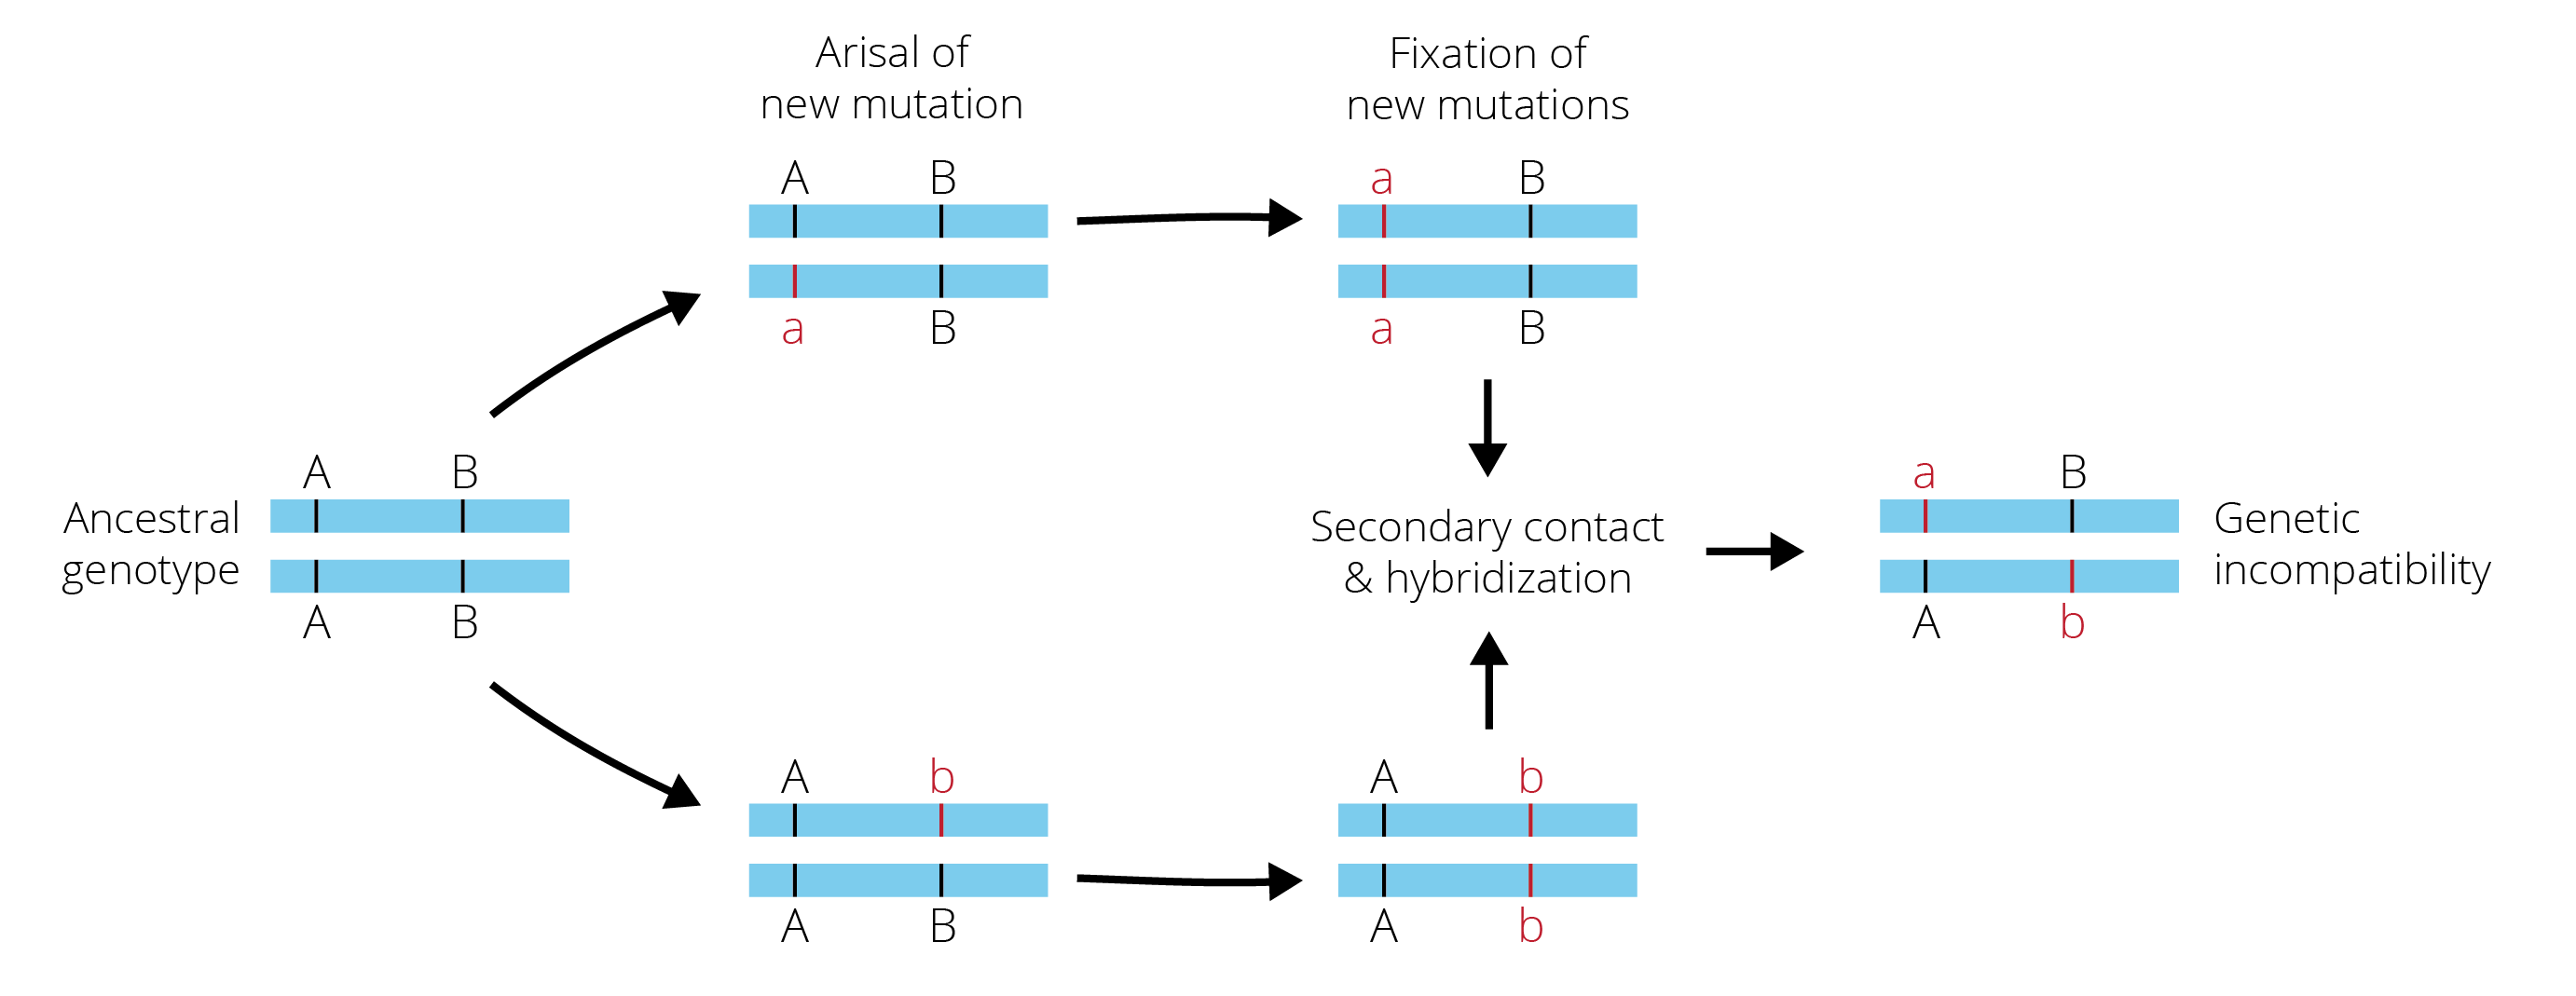 Dobzhansky-Muller incompatibilities arise as a consequence of evolution in geographic isolation. Specifically, new sets of mutations arise in geographic isolation and eventually drift to fixation. Upon secondary contact, recombination of these new alleles in hybrids can be subject to negative epistatic interactions. The novel alleles a and b have no evolutionary history of interacting, and if the alleles are incompatible, hybrid fitness is reduced.